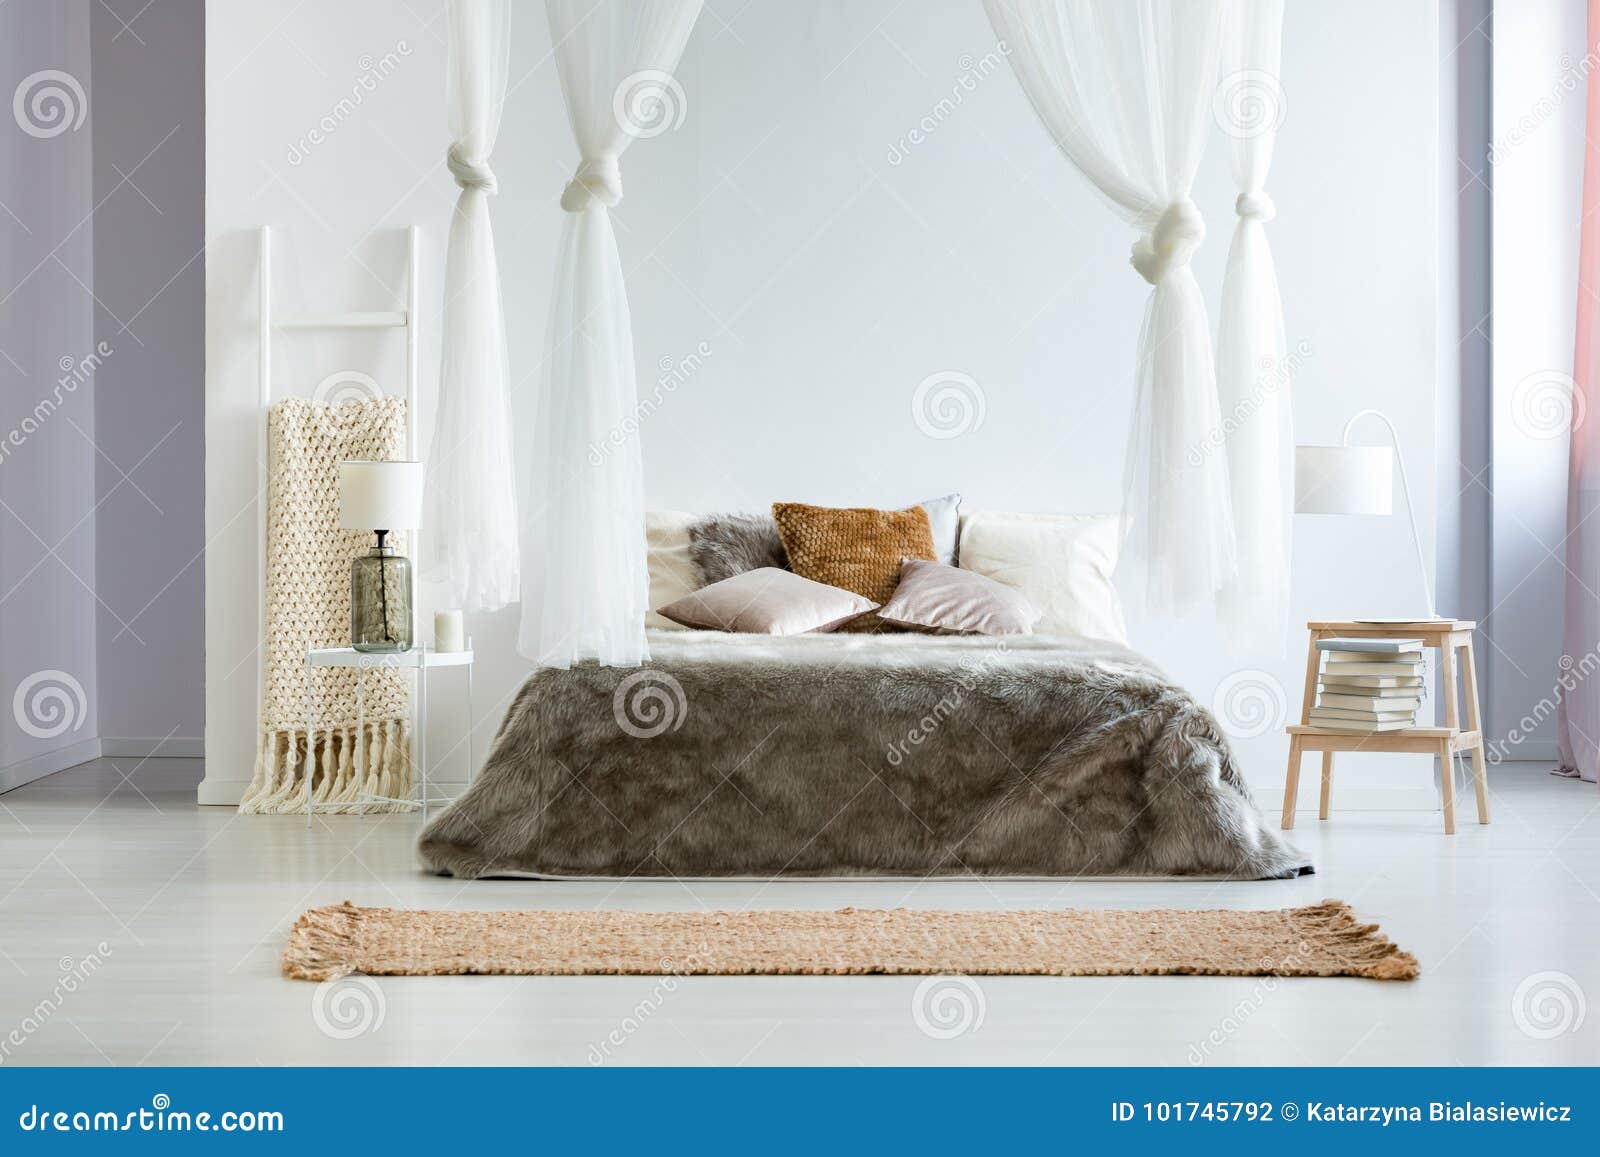 King Size Bed With Fur Coverlet Stock Photo Image Of Blanket